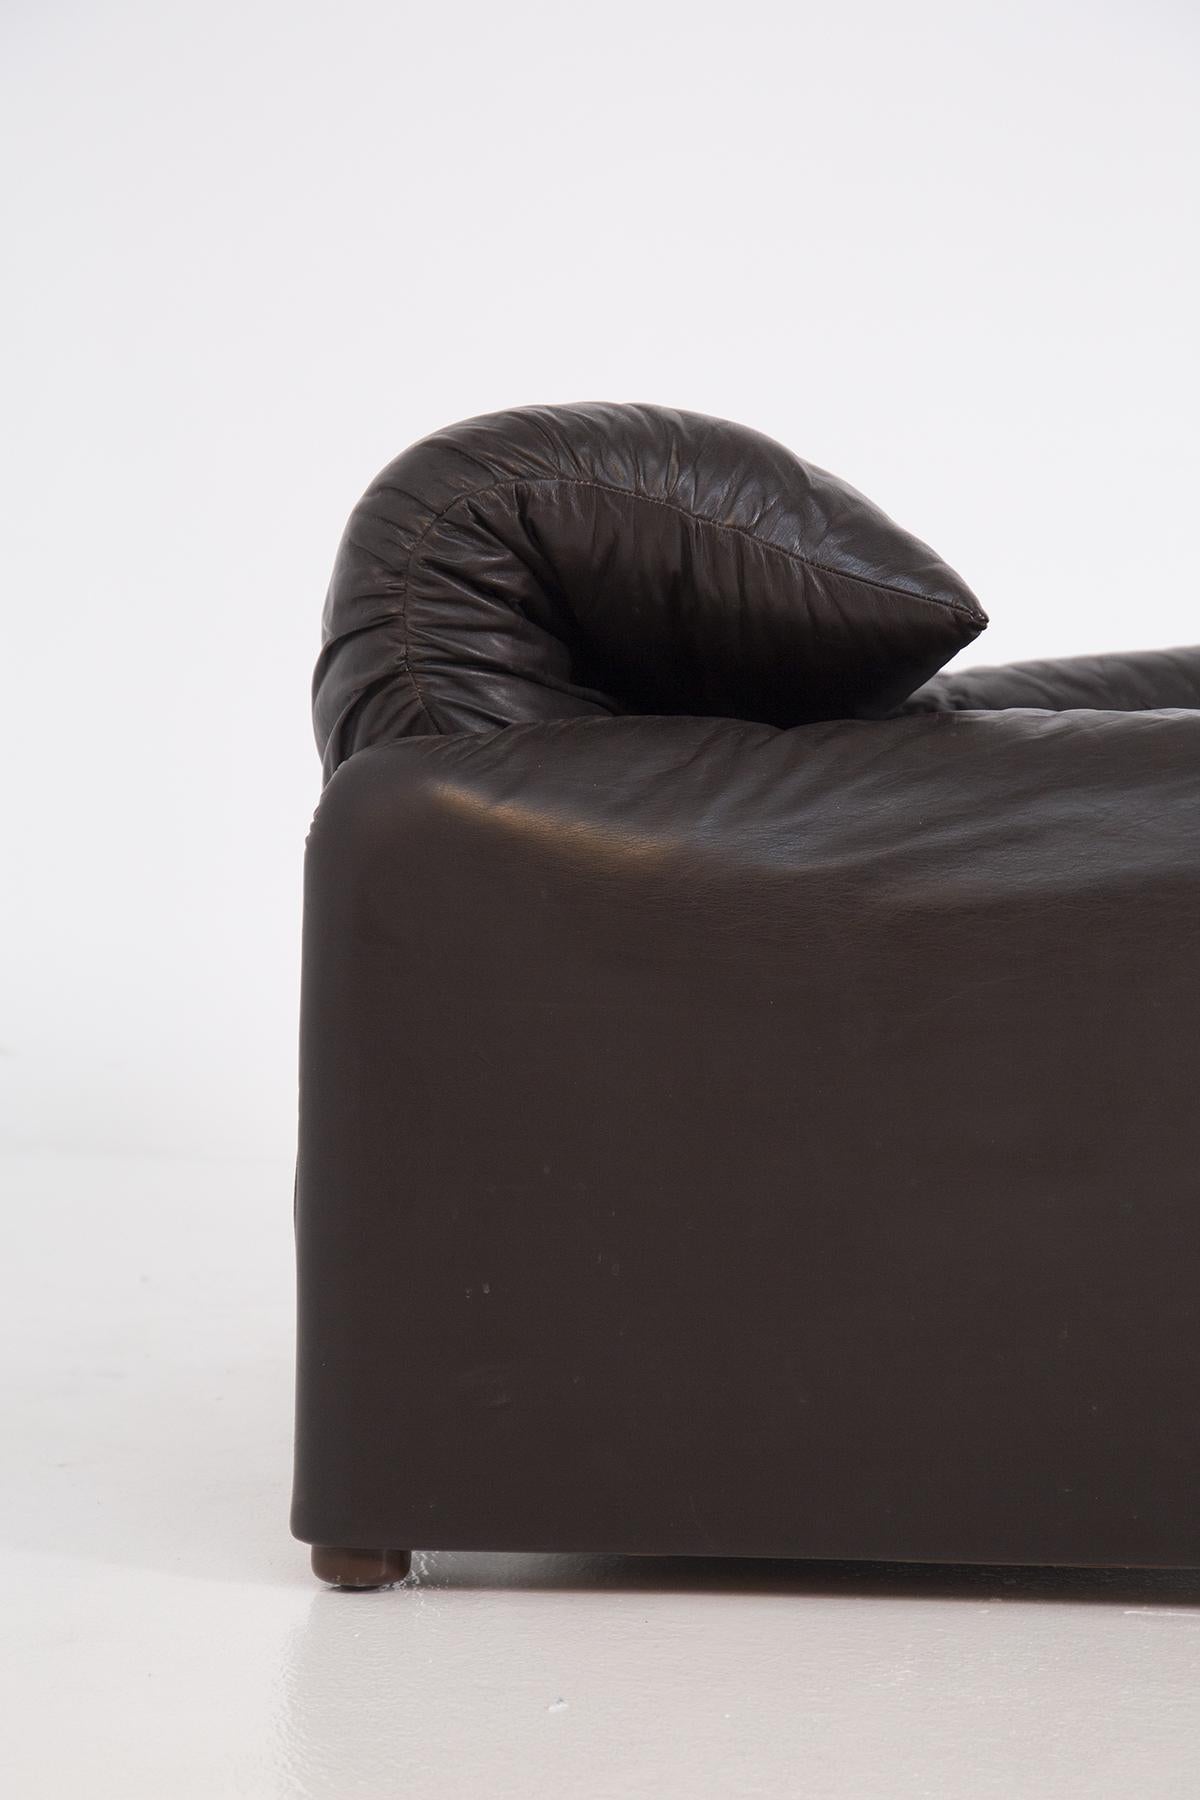 Vico Magistretti Armchair and Ottoman in Leather for Cassina, First Edition 9